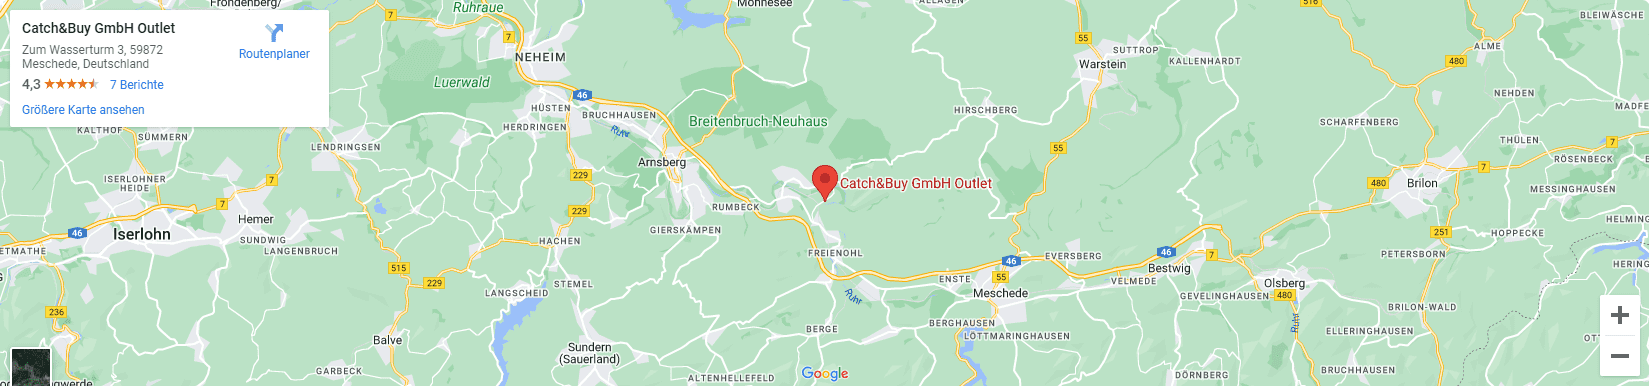 Profirst Catch & Buy GmbH Outlet Google Maps